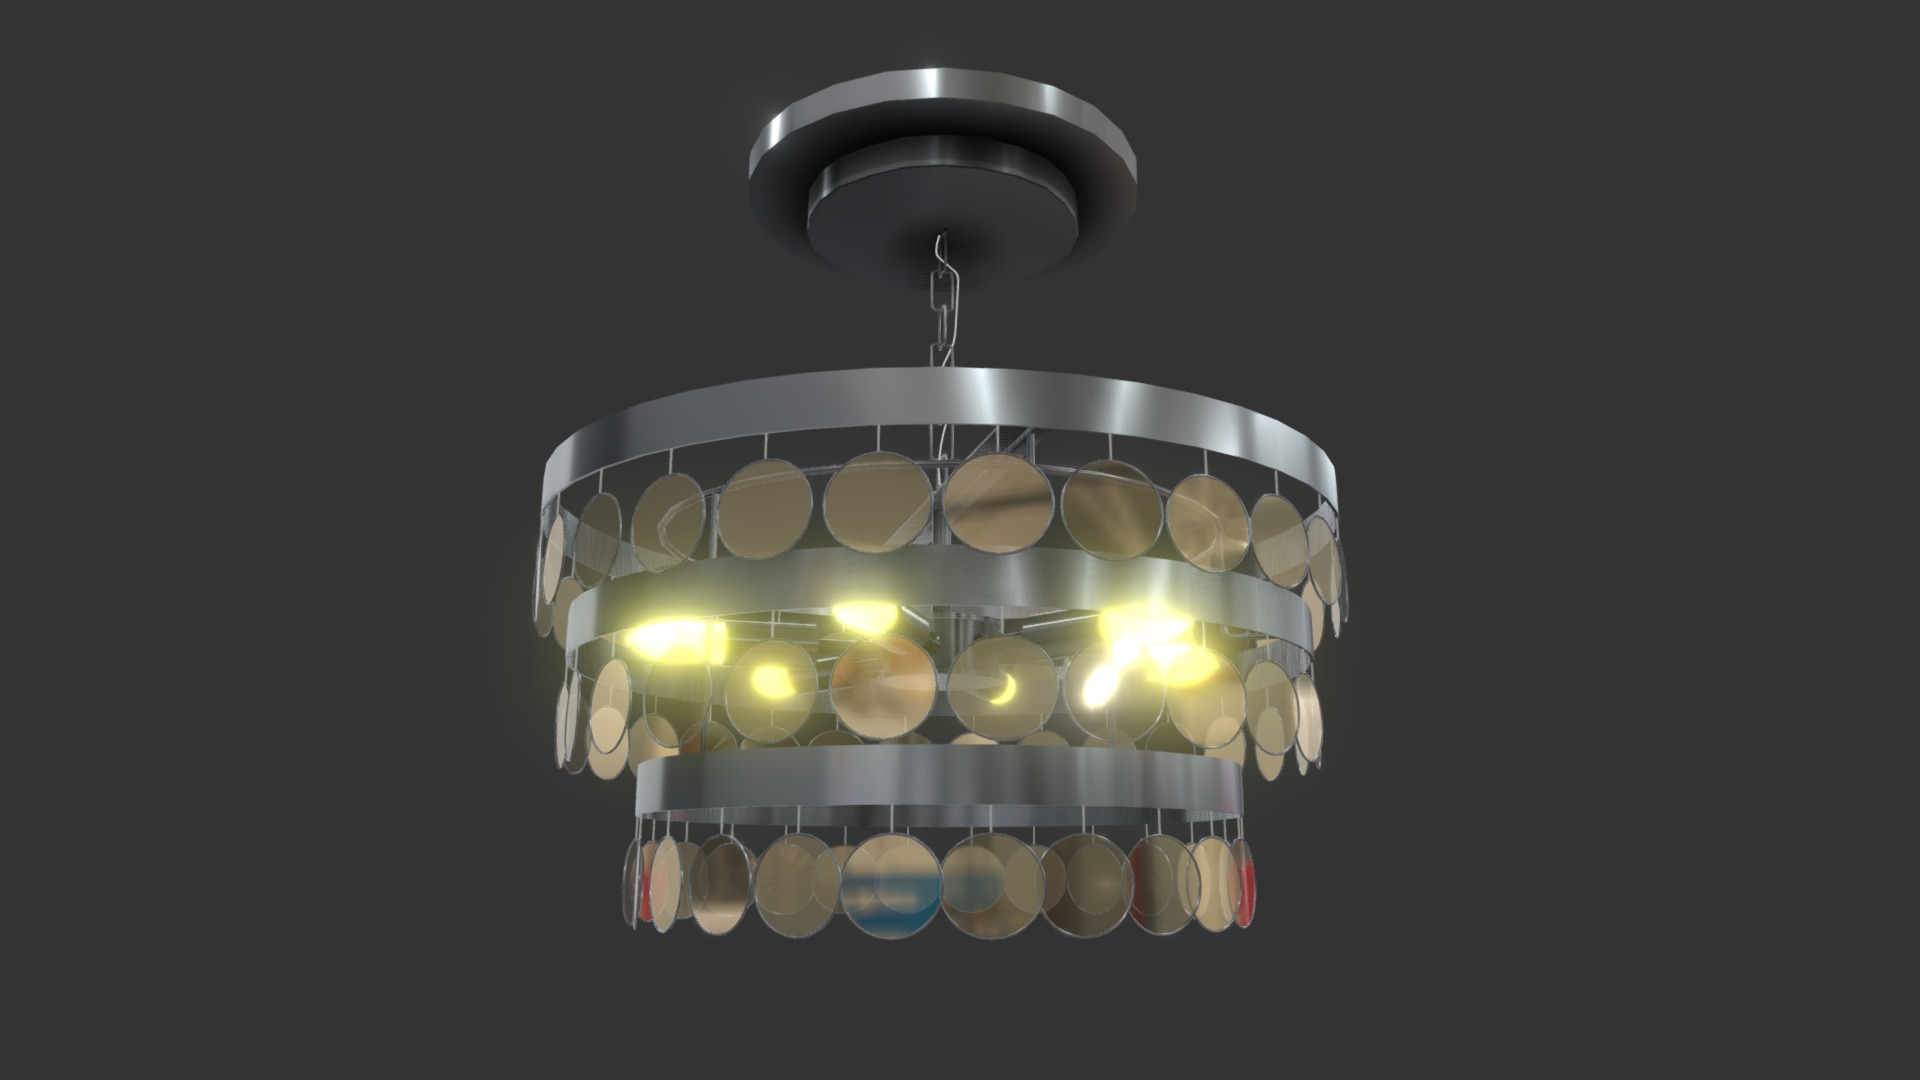 3D model HGP2018CL-36 - This is a 3D model of the HGP2018CL-36. The 3D model is about a chandelier with lights.